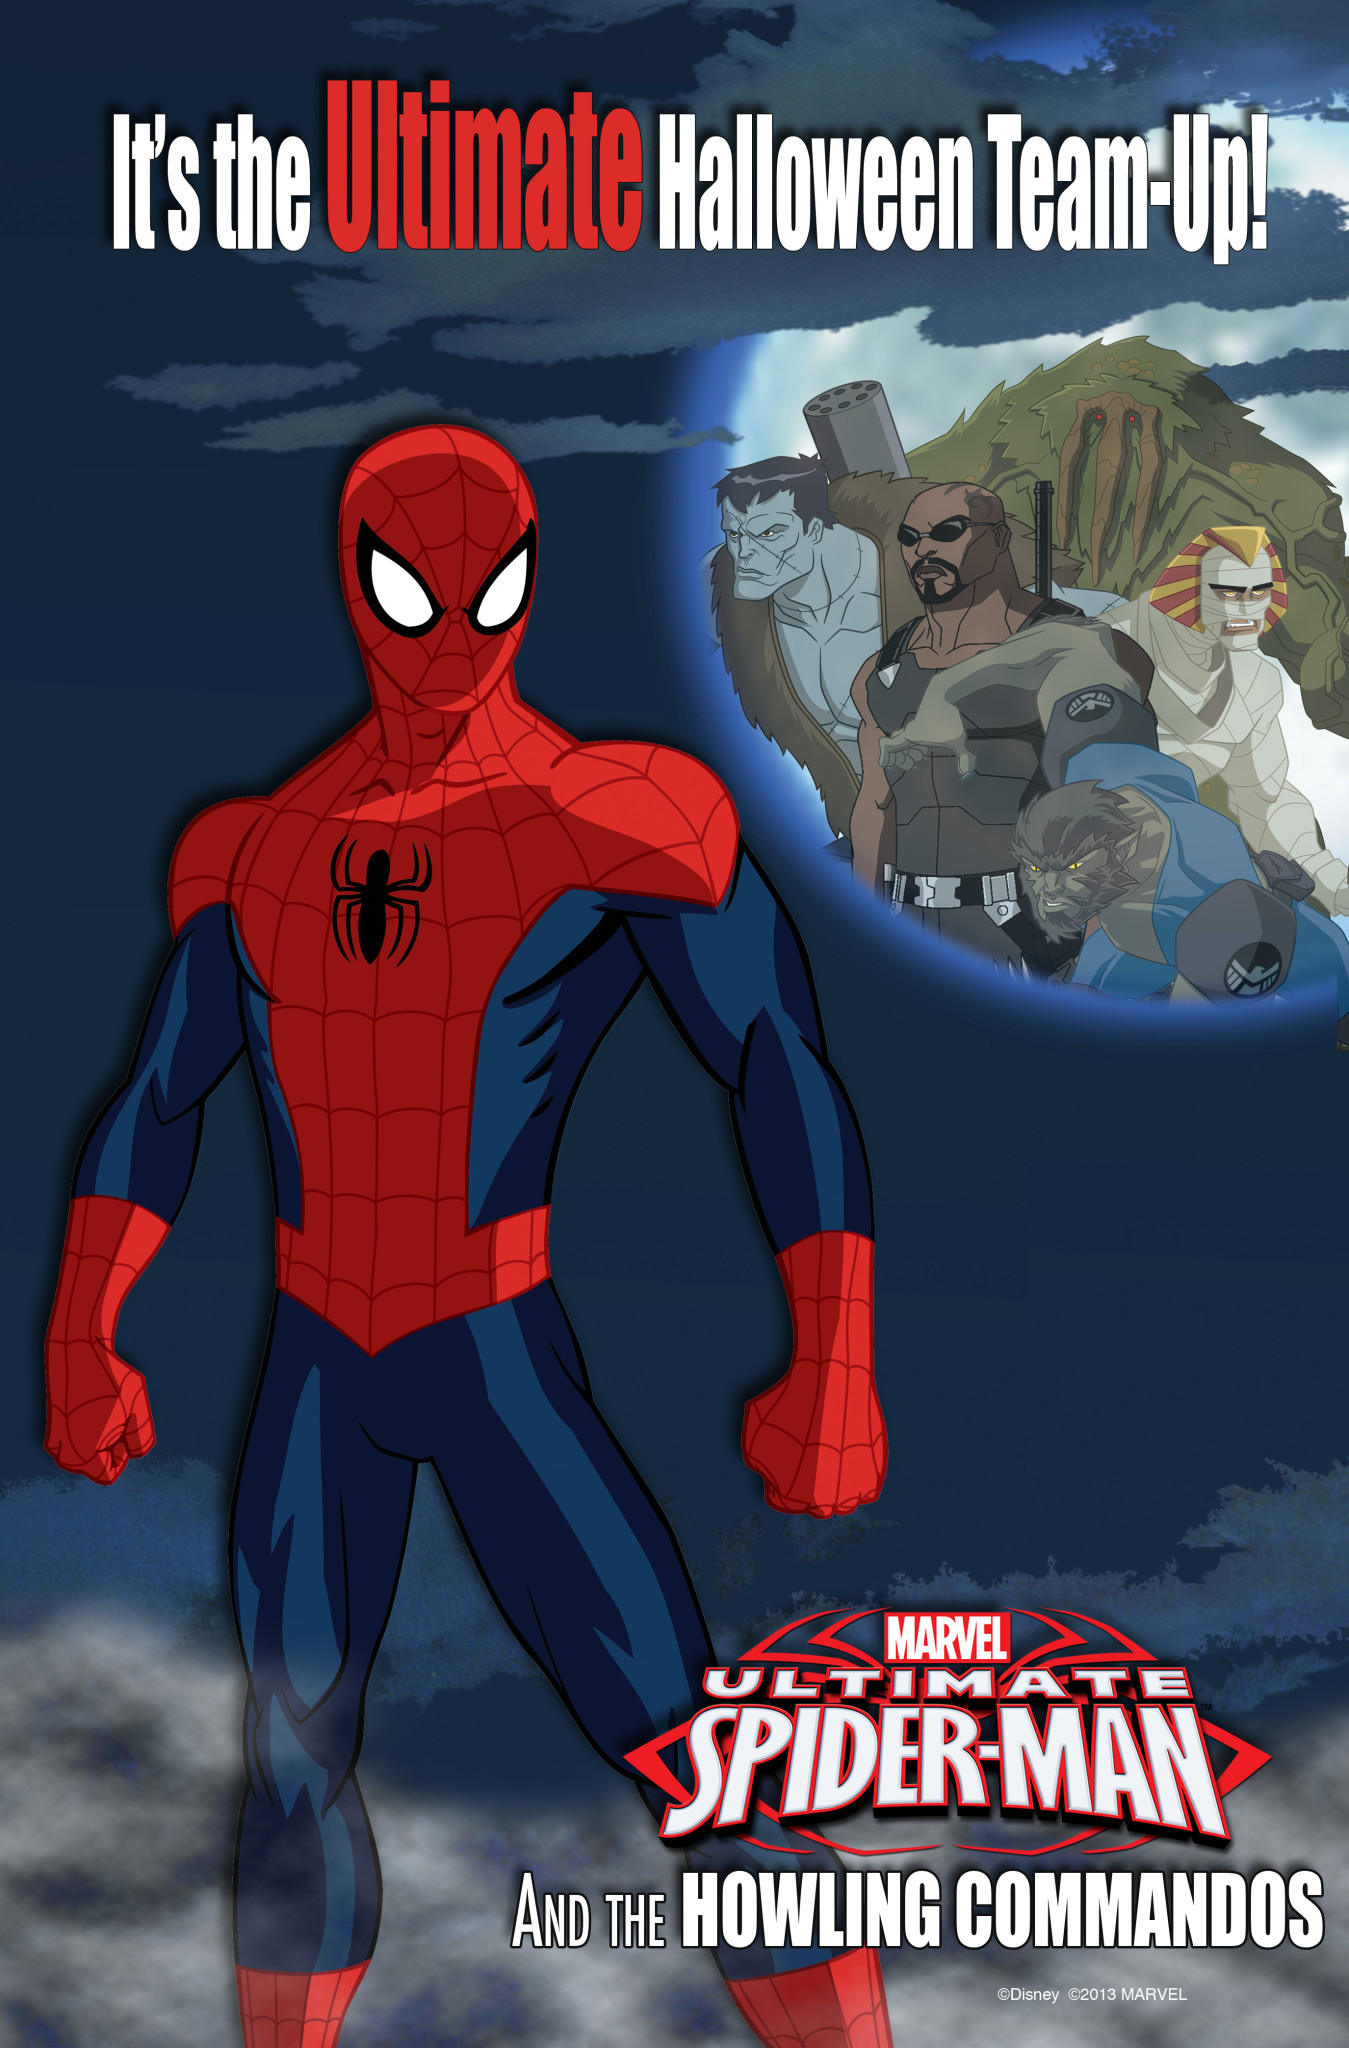 ‘Ultimate Spider-Man’ To Have One Hour Halloween Special on October 5, 2013